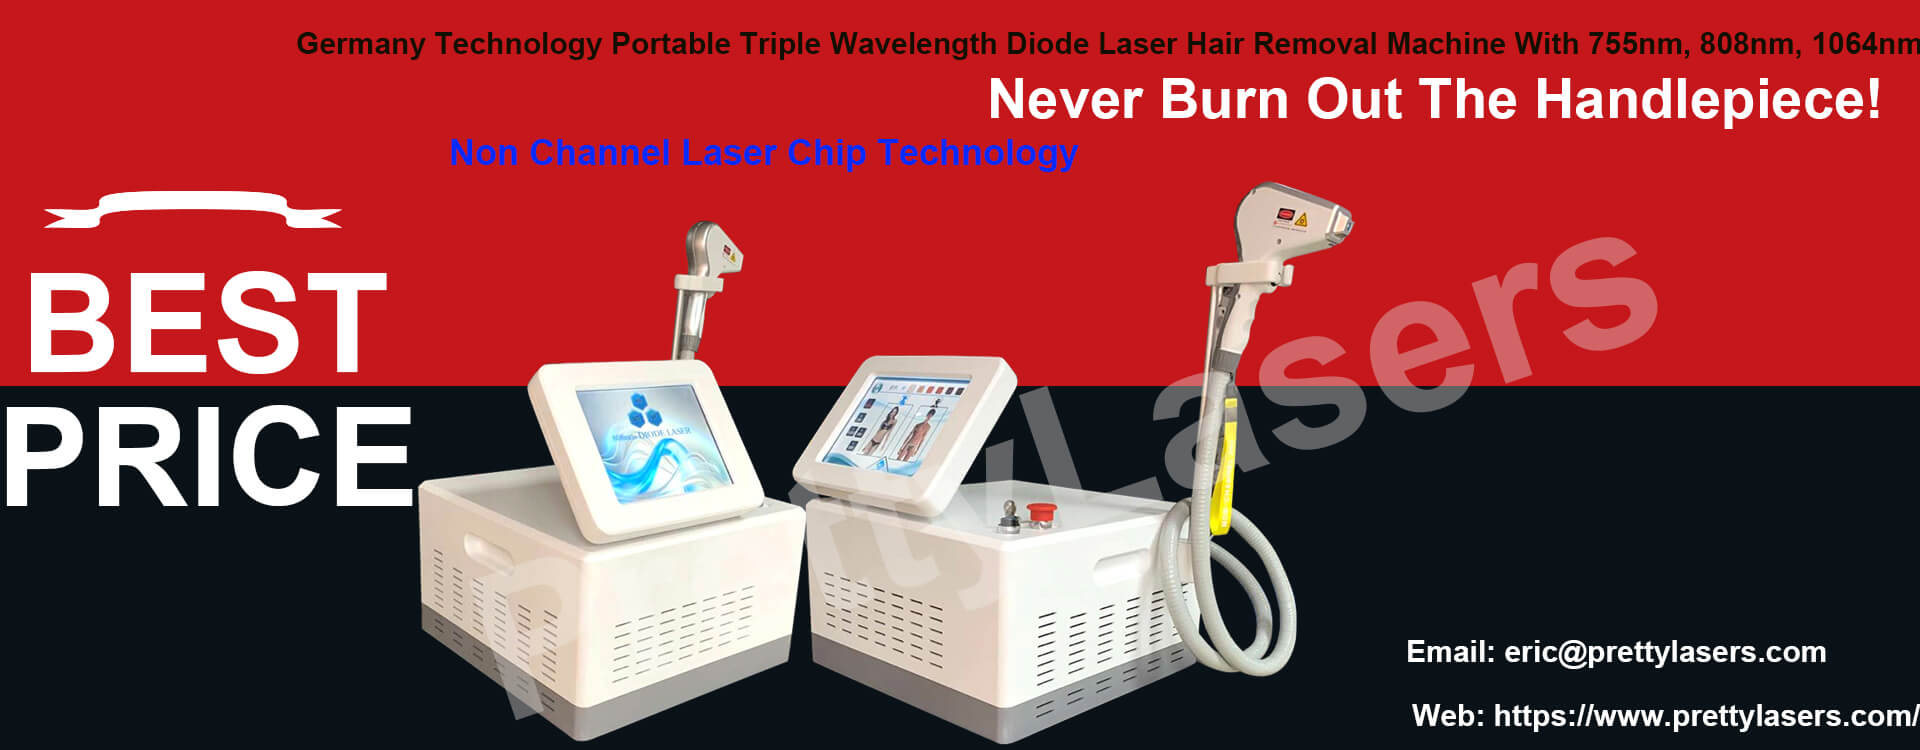 Germany Technology Portable Triple Wavelength Diode Laser Hair Removal Machine With 755nm, 808nm, 1064nm